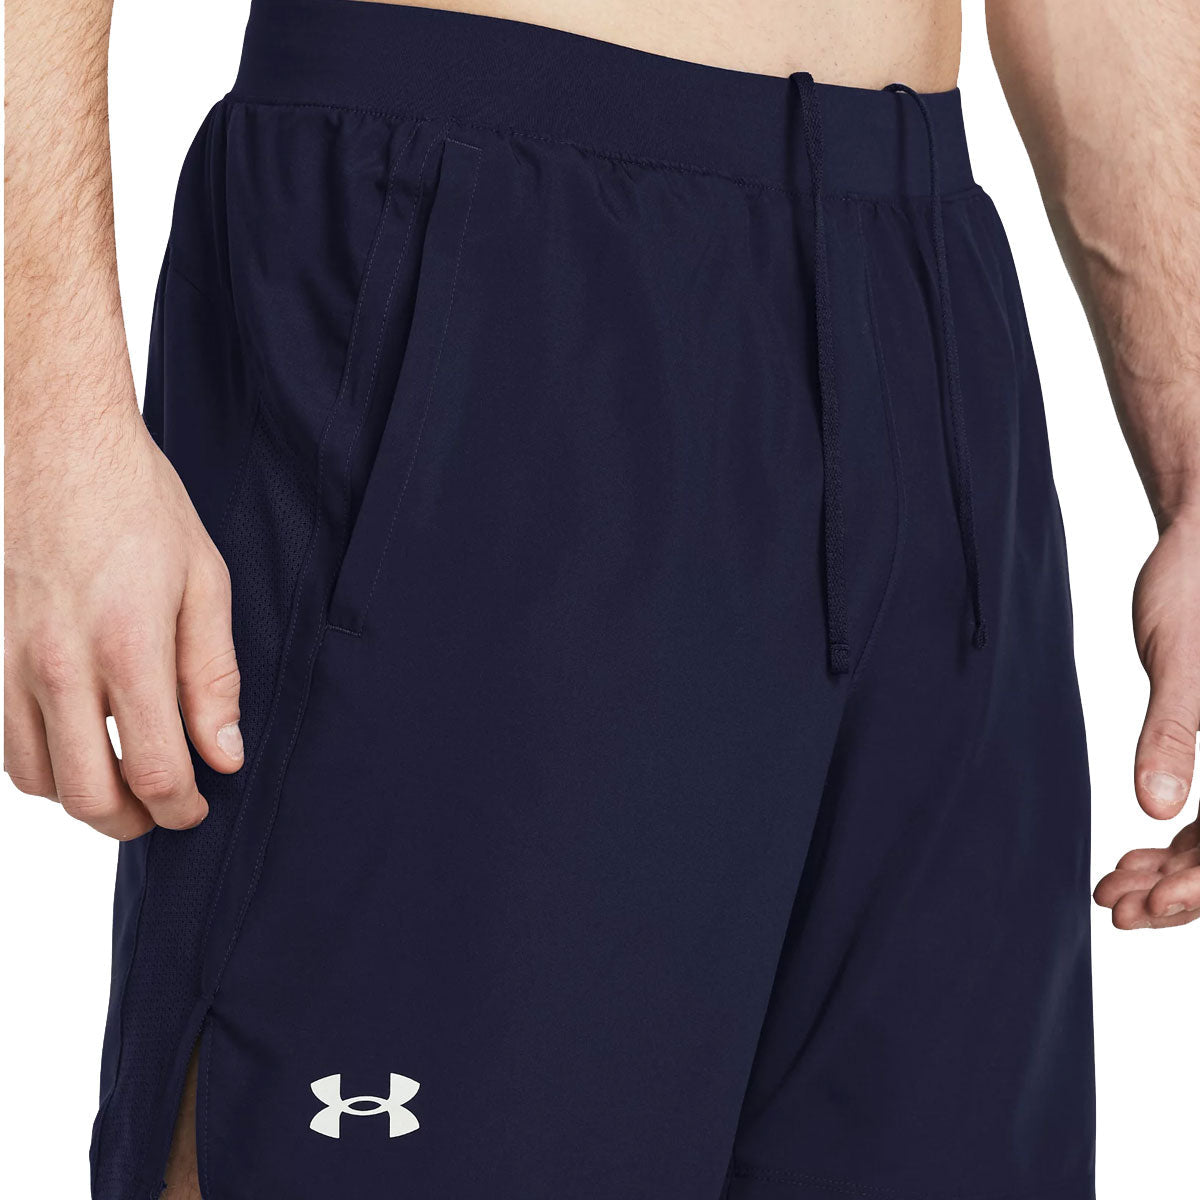 Under Armour Launch 7 inch Running Shorts - Mens - Midnight Navy/Reflective